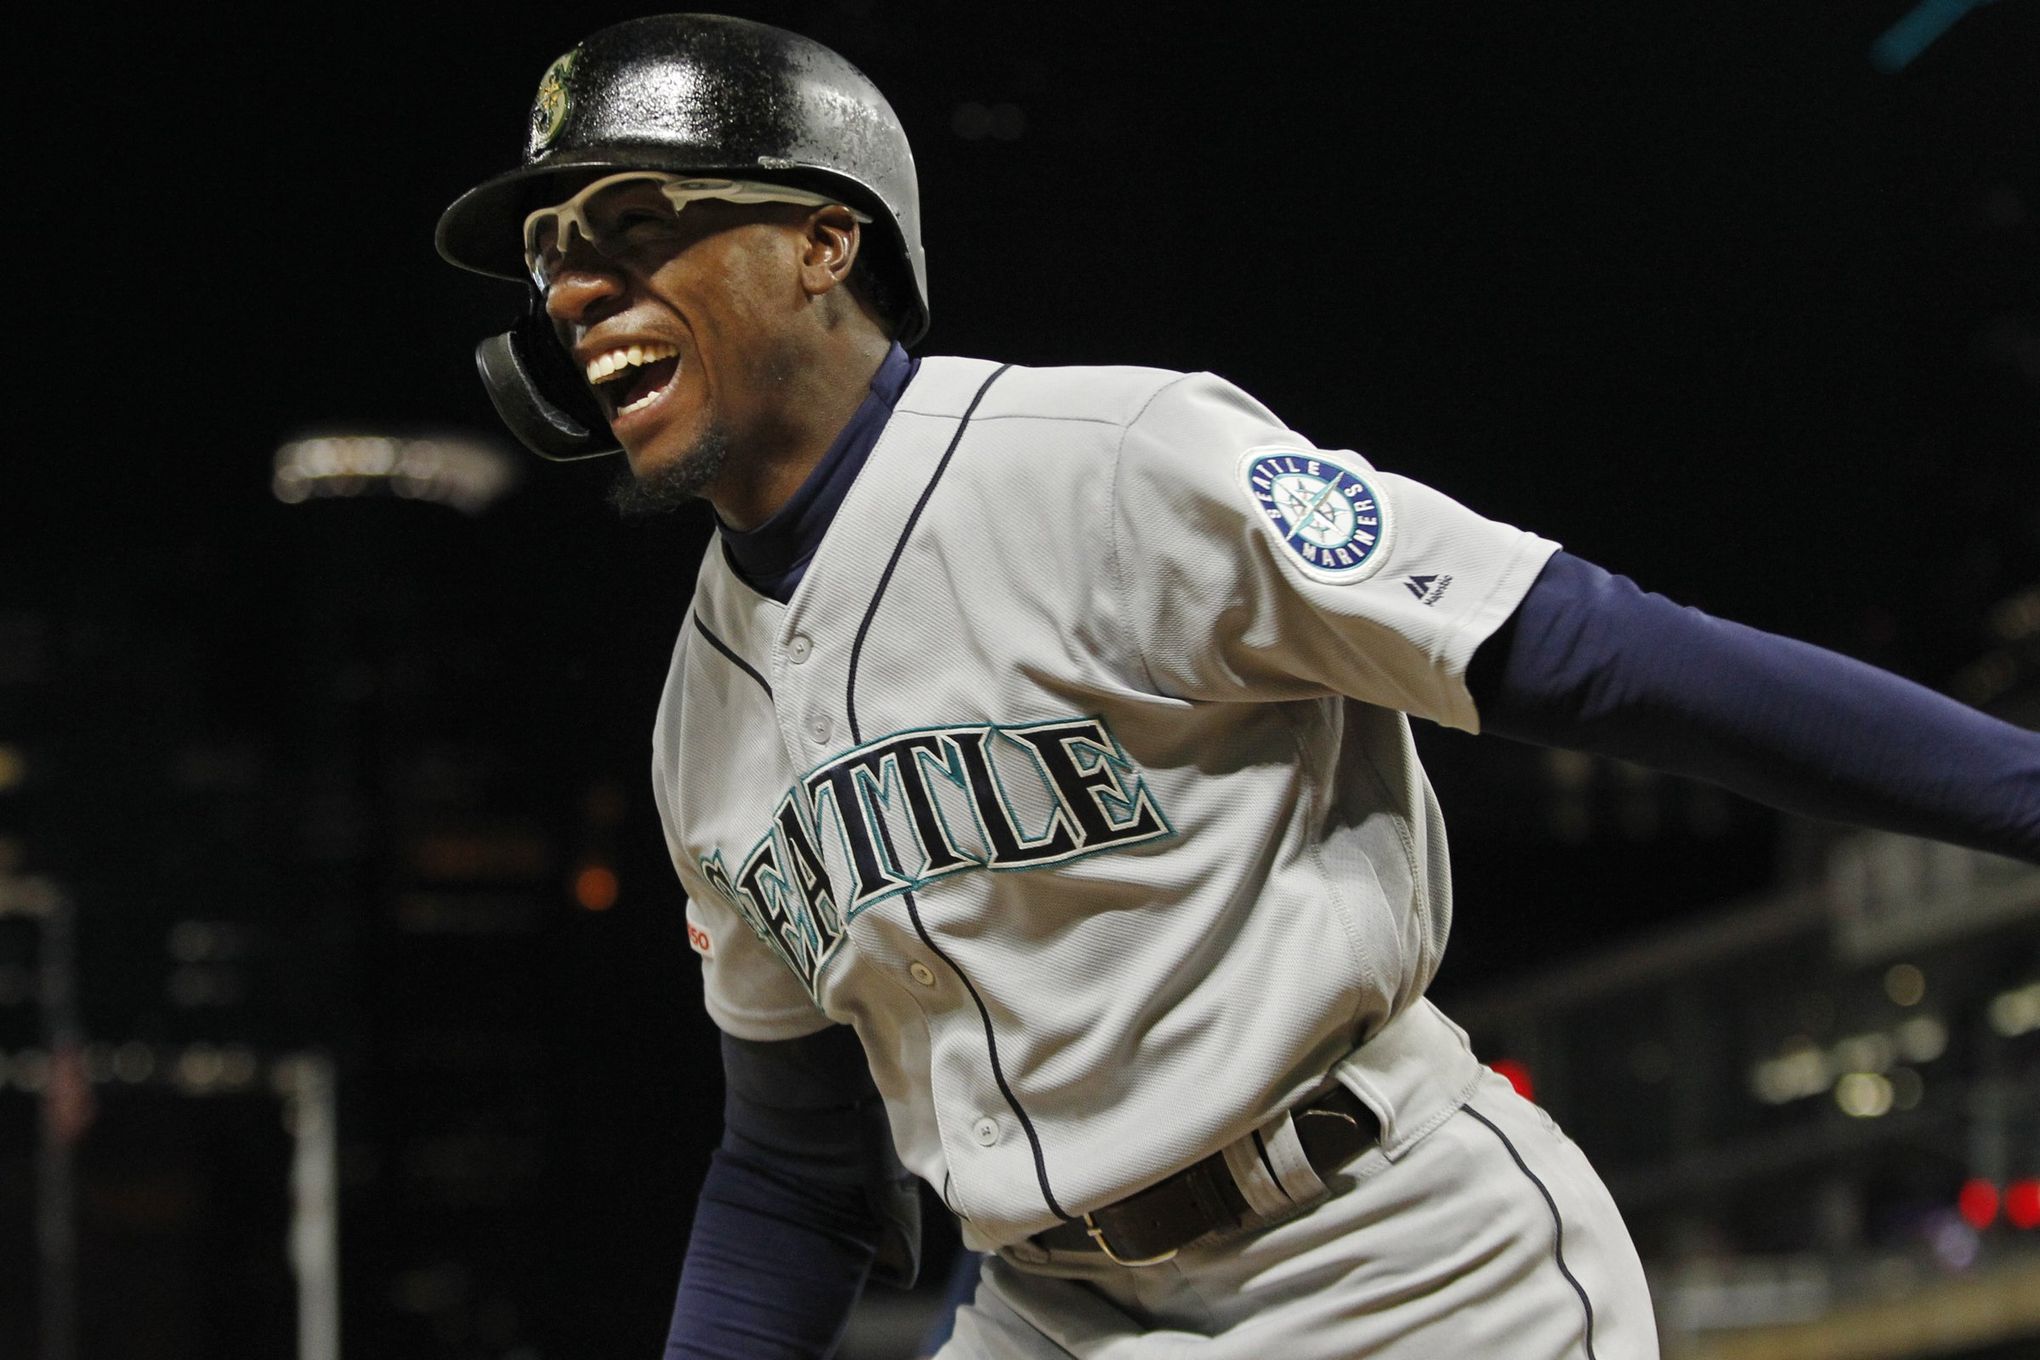 Lee, Mariners top Cubs for 6th straight win